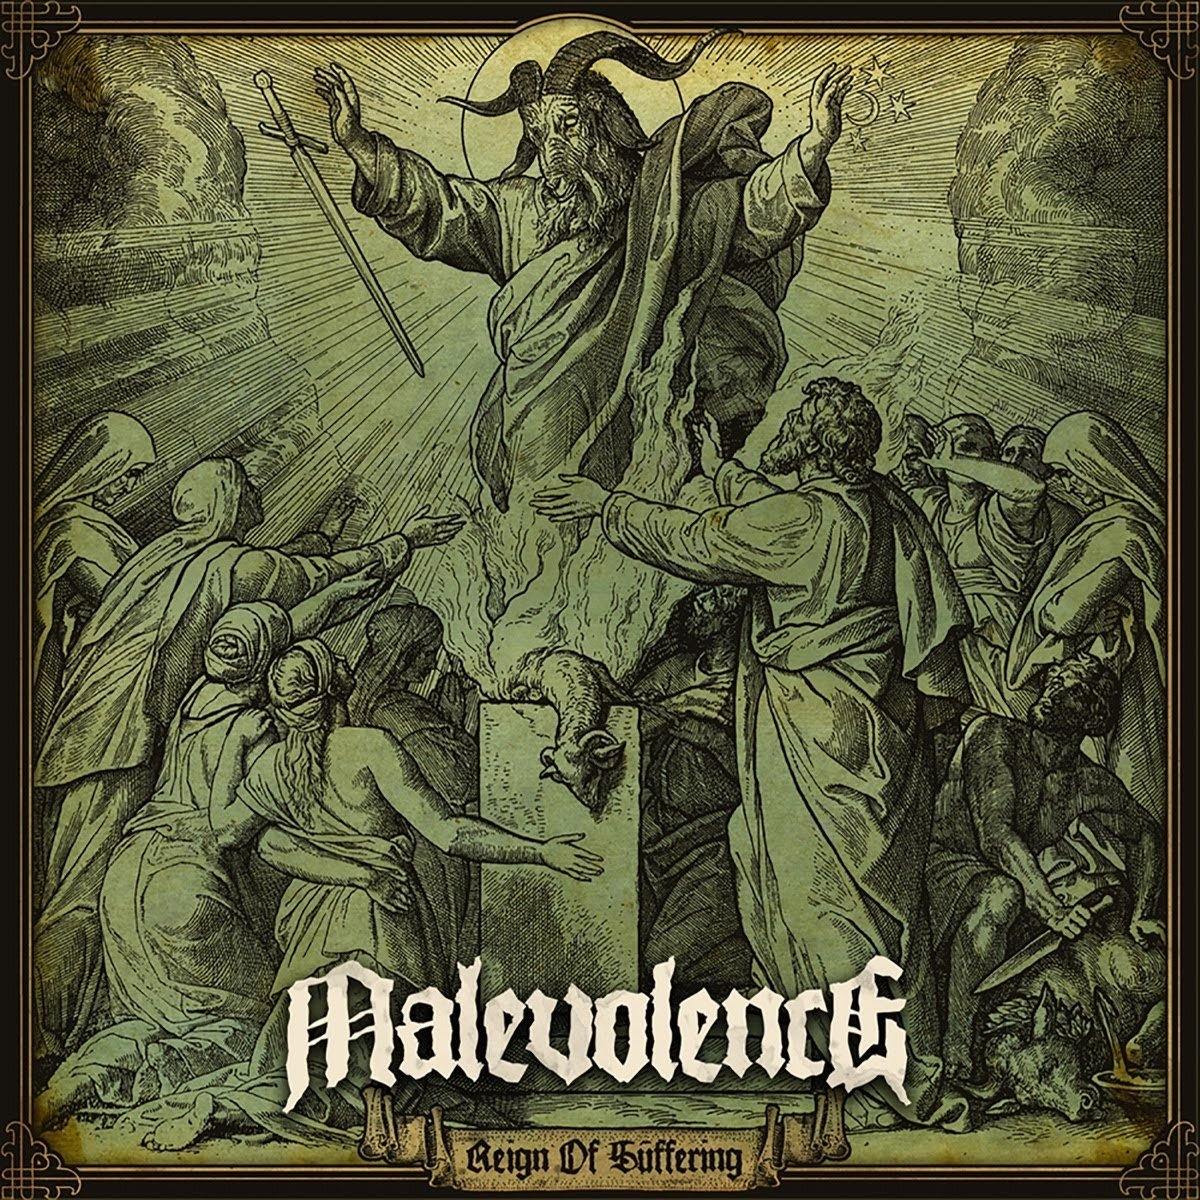 Buy – Malevolence "Reign of Suffering" CD – Band & Music Merch – Cold Cuts Merch